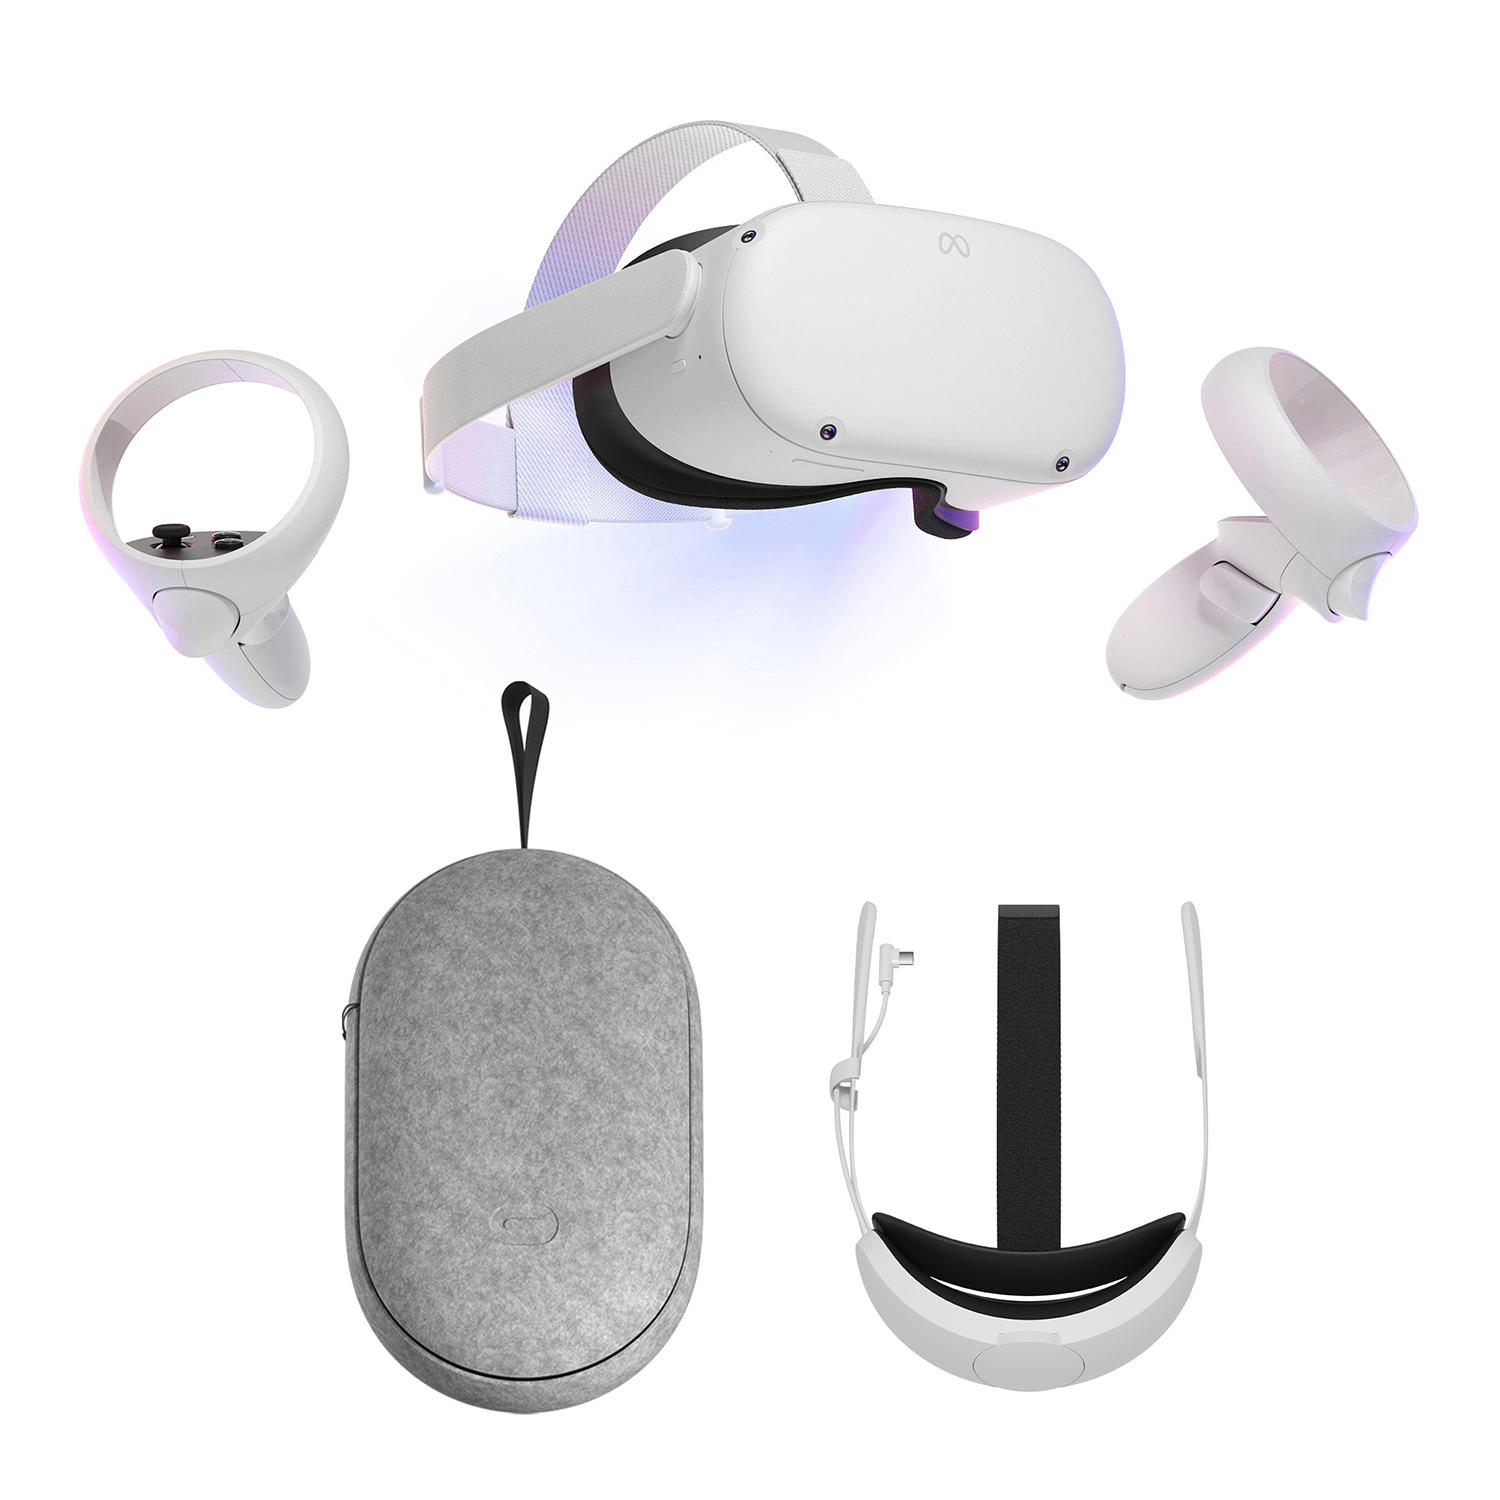 Oculus Quest 2 128GB bundle with Quest 2, Elite Strap with Battery and Carrying Case